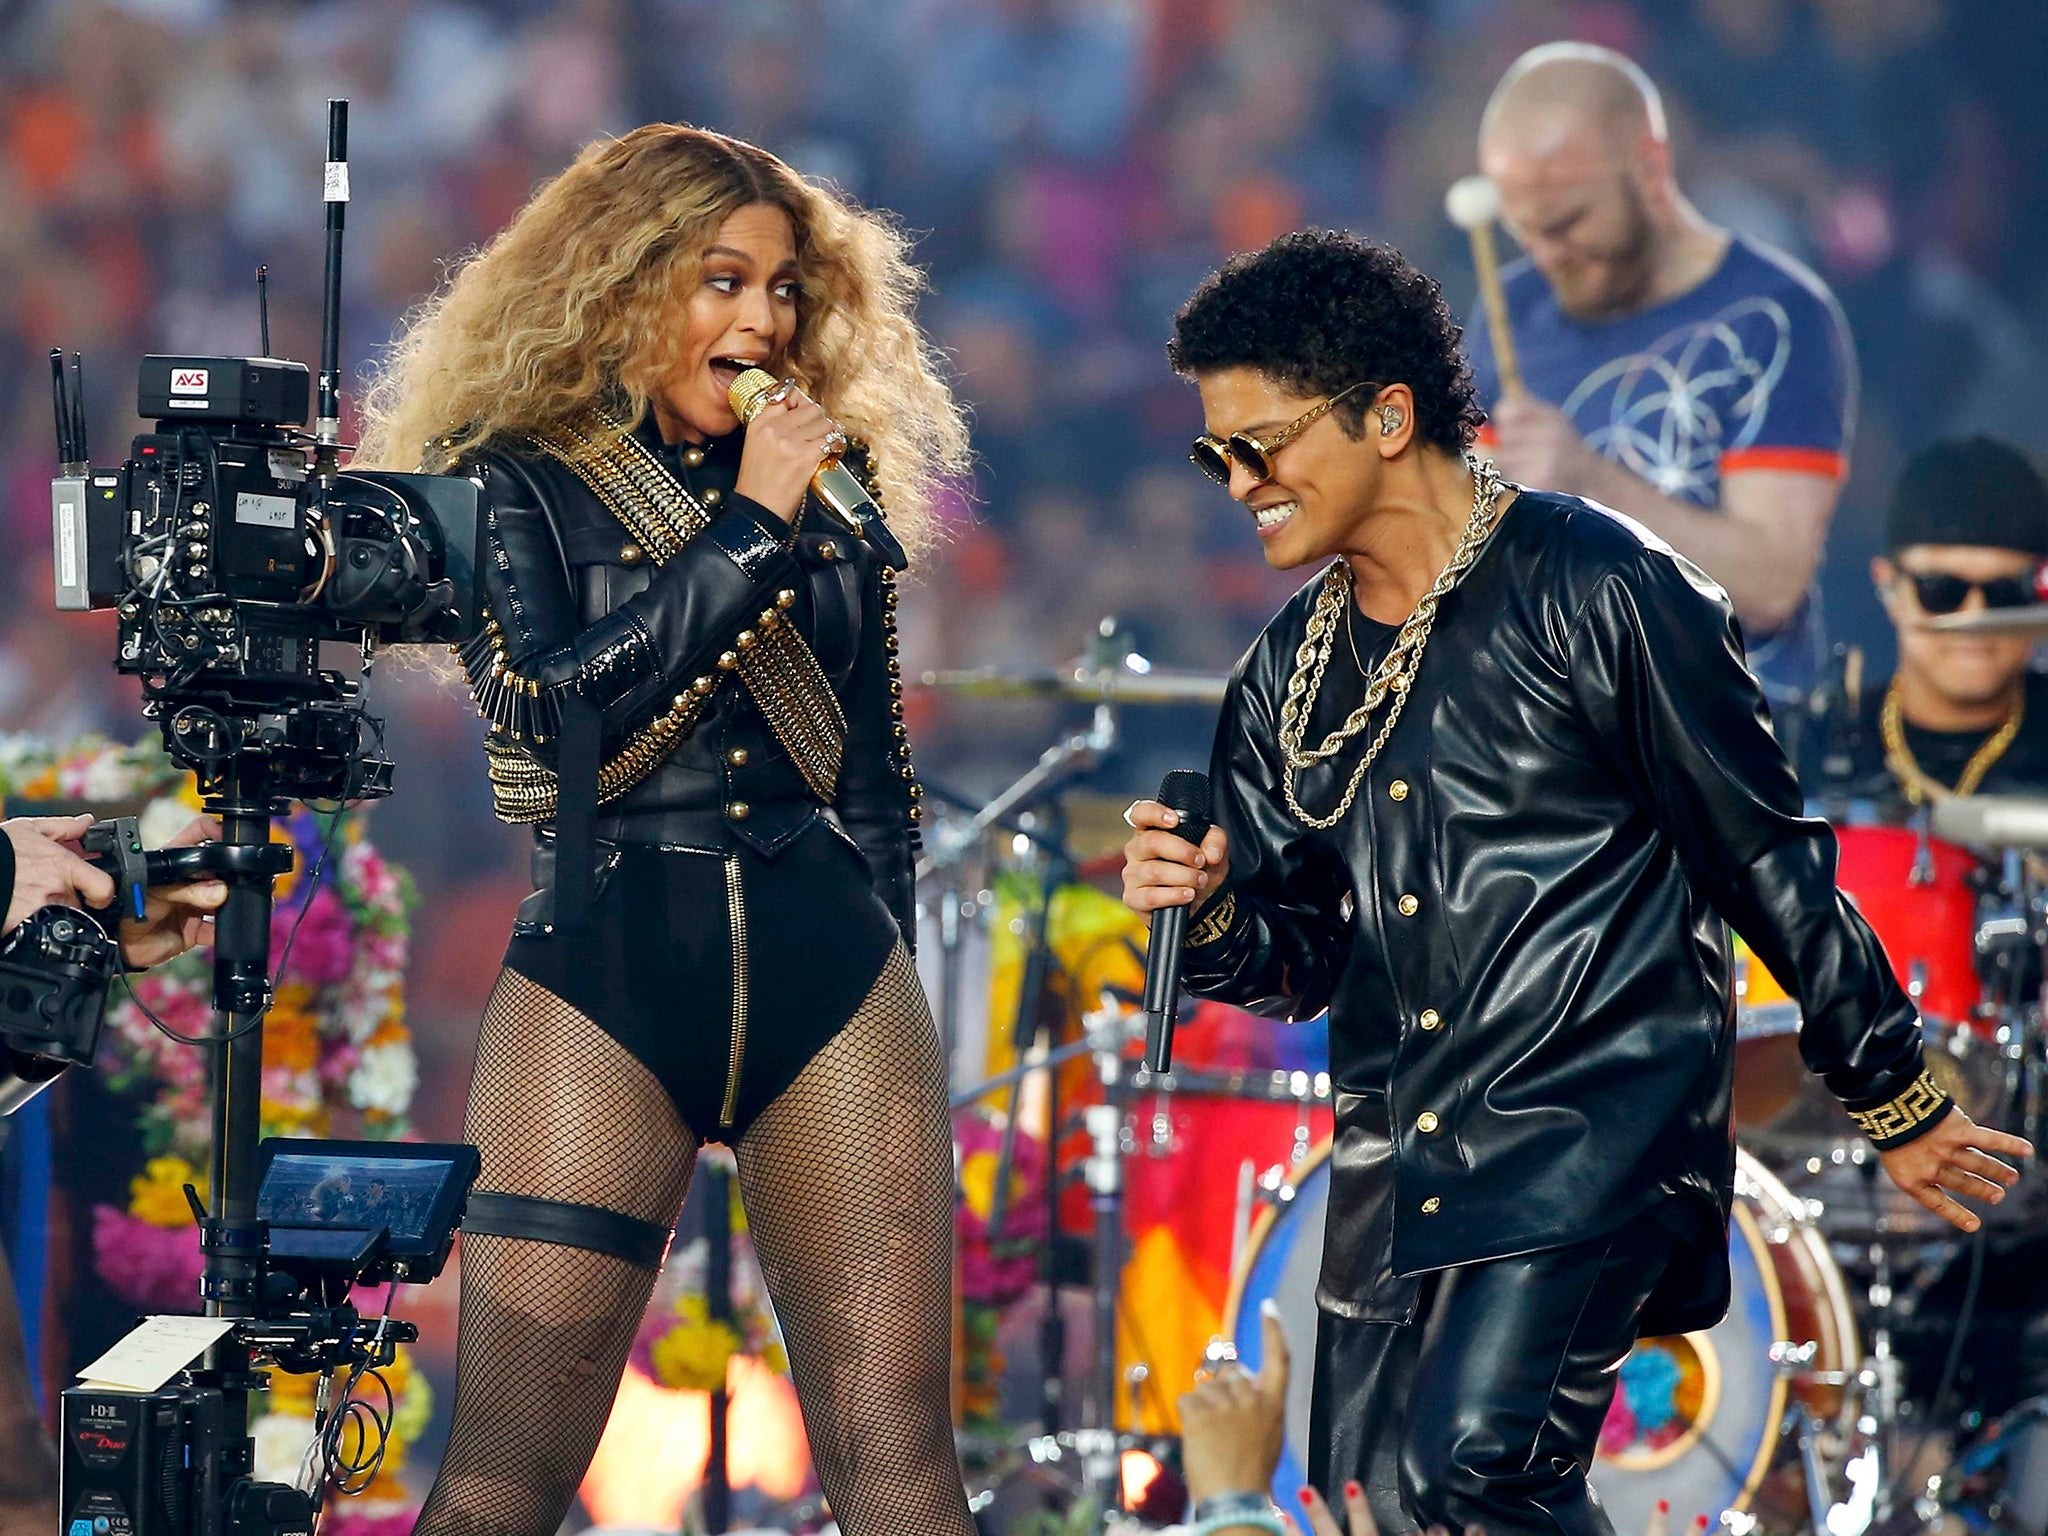 Beyonce and Bruno Mars perform during half-time show at the NFL's Super Bowl 50 football game between the Carolina Panthers and the Denver Broncos in Santa Clara, California